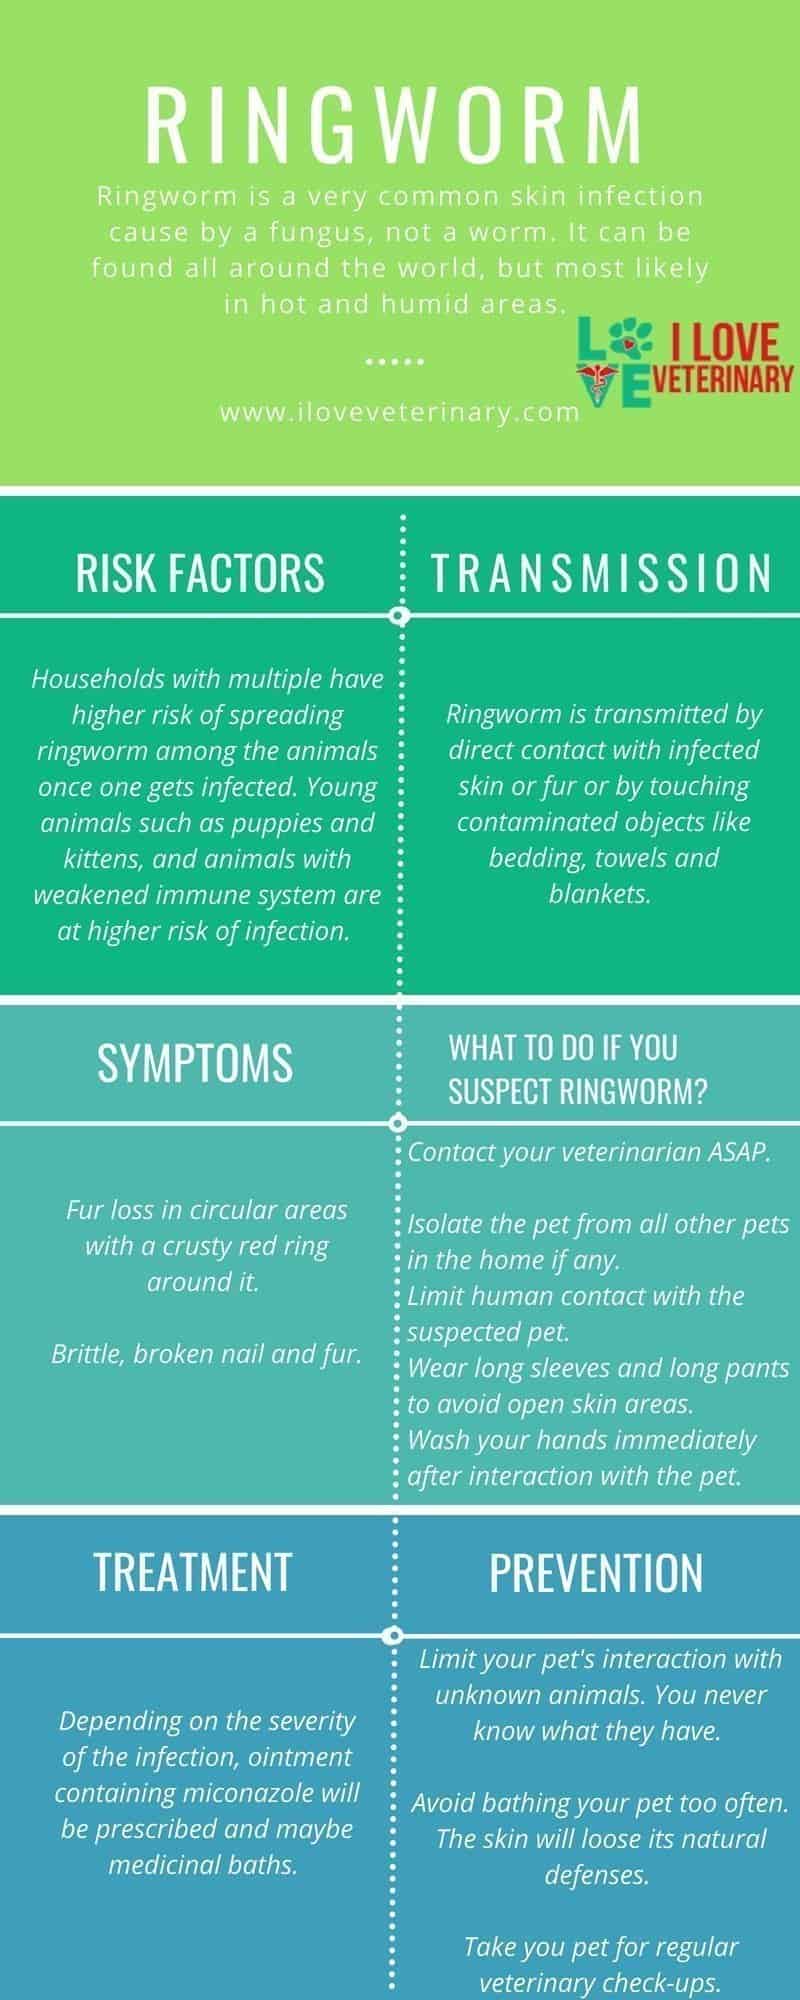 ringworm infection, dermatophytosis, pets